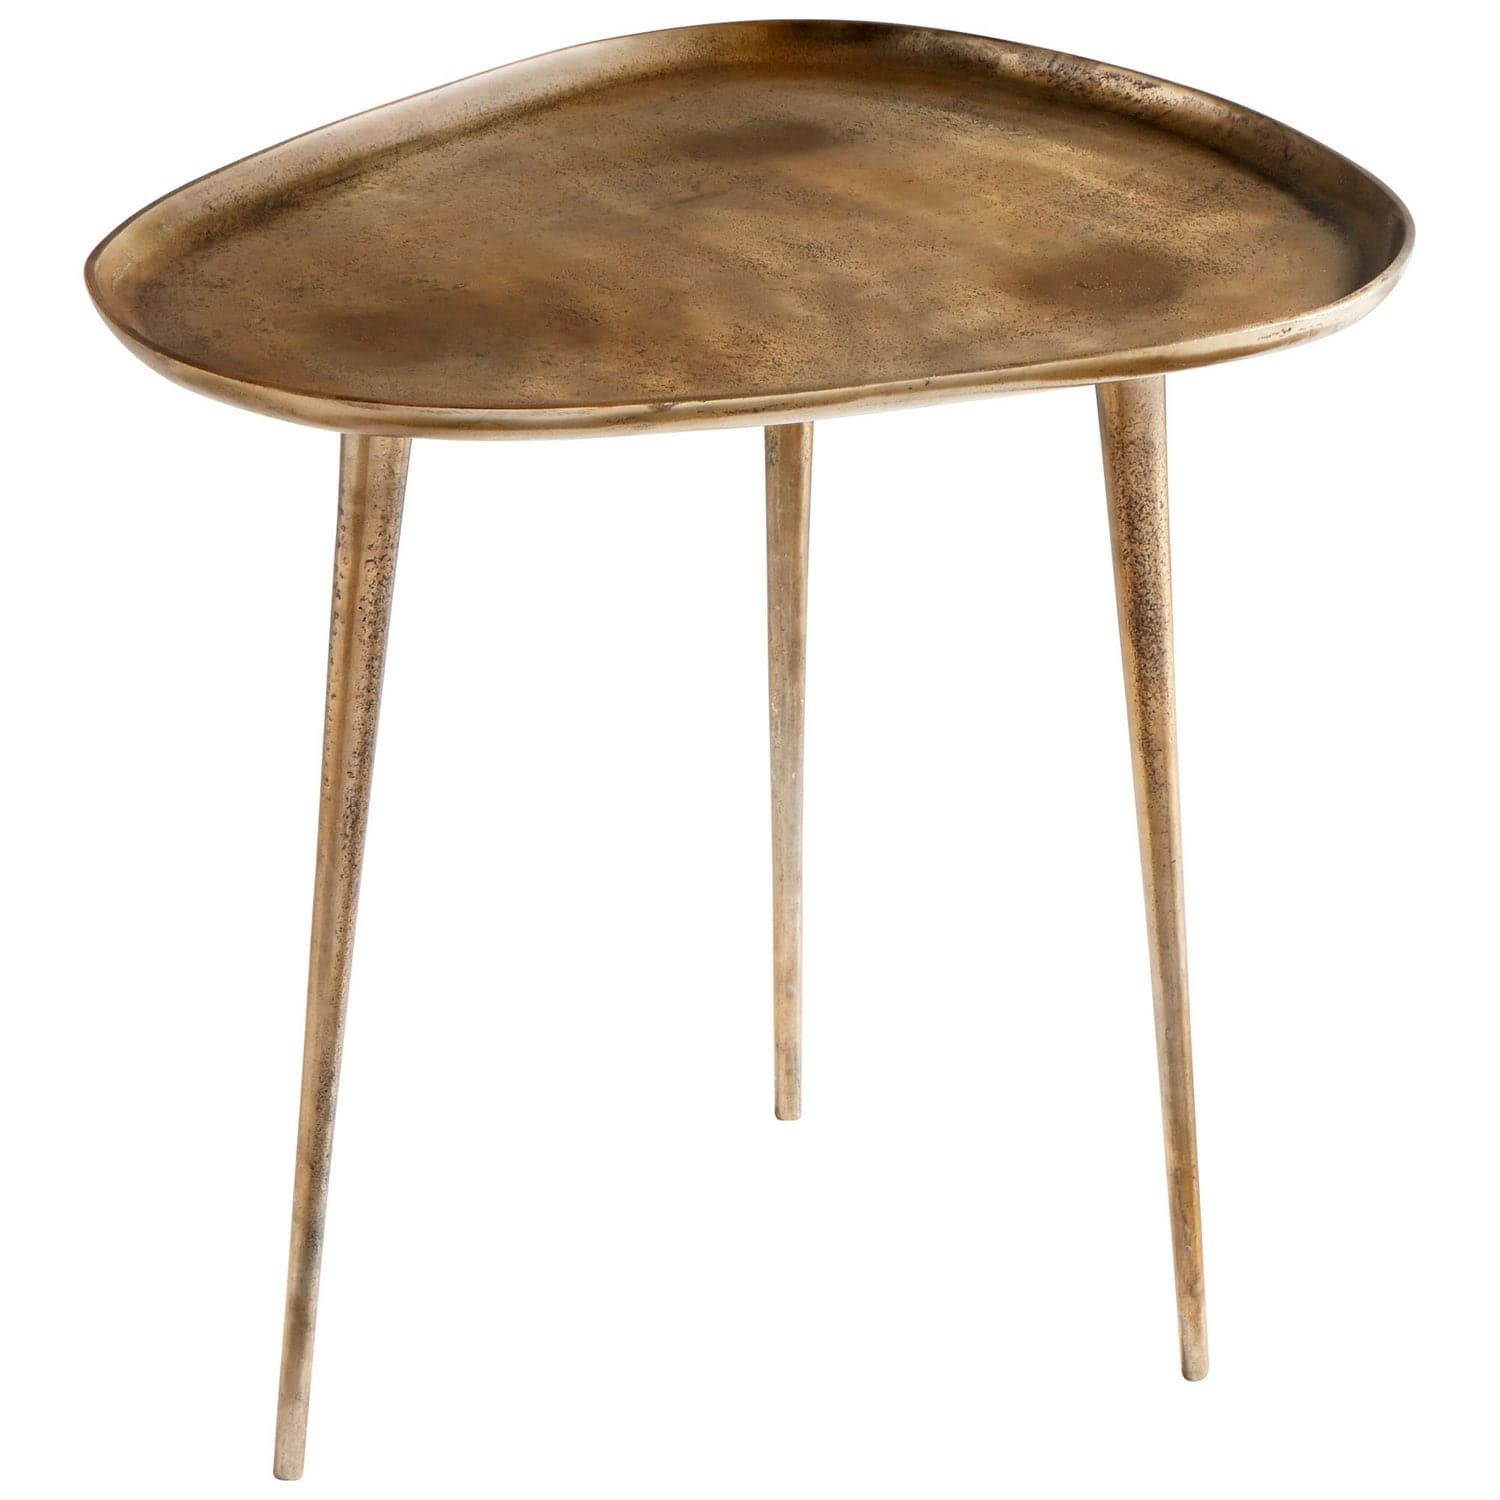 Cyan - 10116 - Side Table - Antique Gold